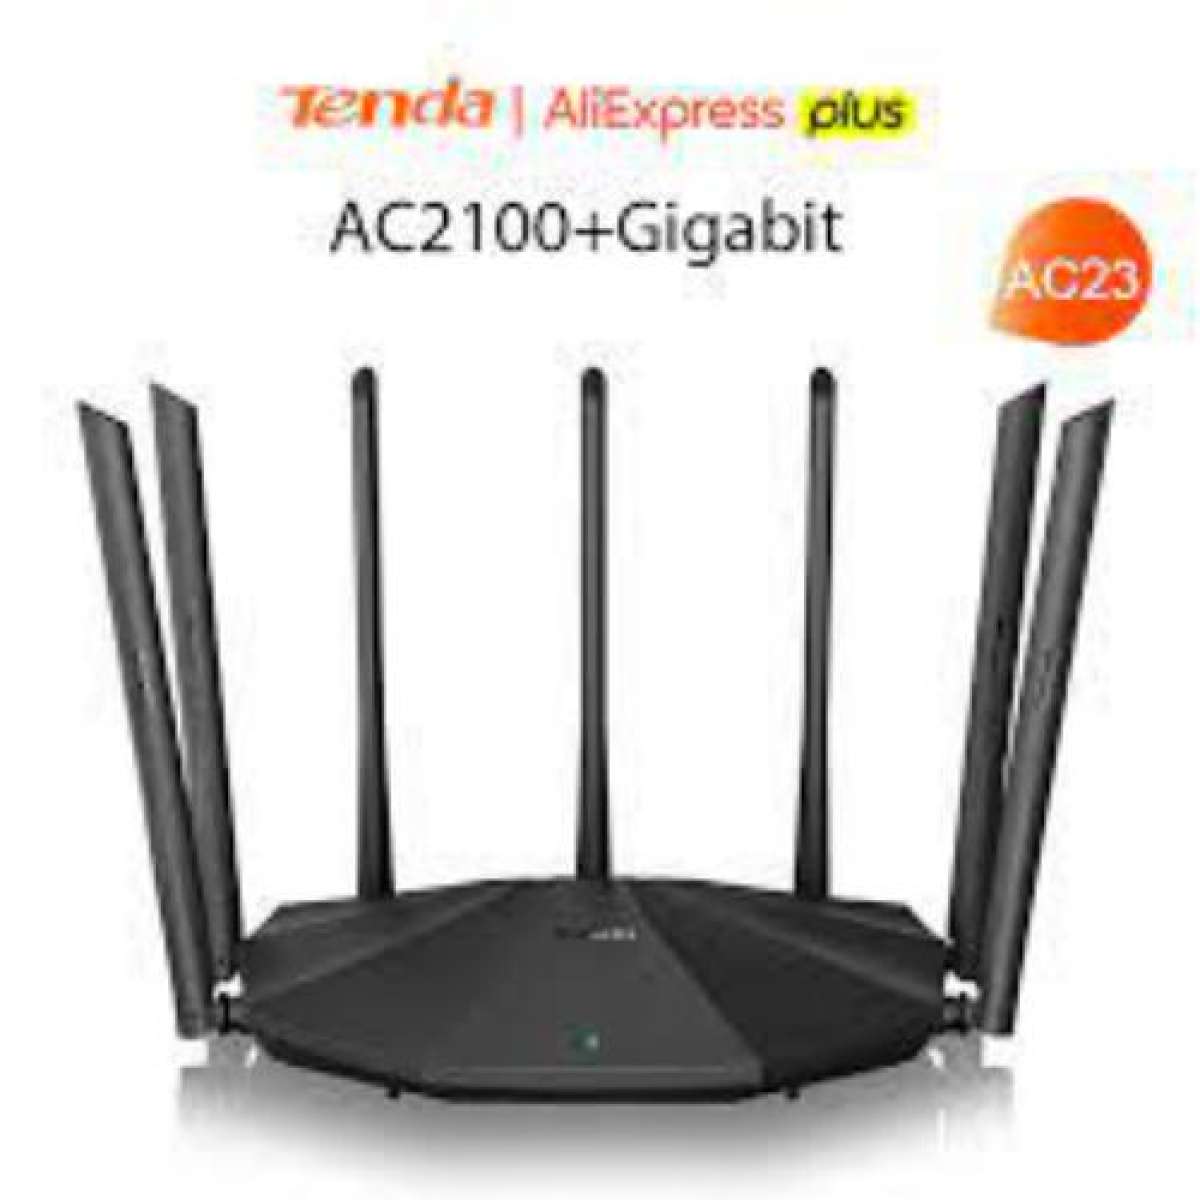 Tenda AC23 - AC2100 for Advanced WiFi Speed WiFi Dual Band 210Mbps Speed Data Support High Range 4 in 1 Router Range Extender Router Wisp Access Point Whole Home Coverage Next Generation Gaming Router Tenda AC2100 WiFi Router 2.4Ghz, 5Ghz Dual Band